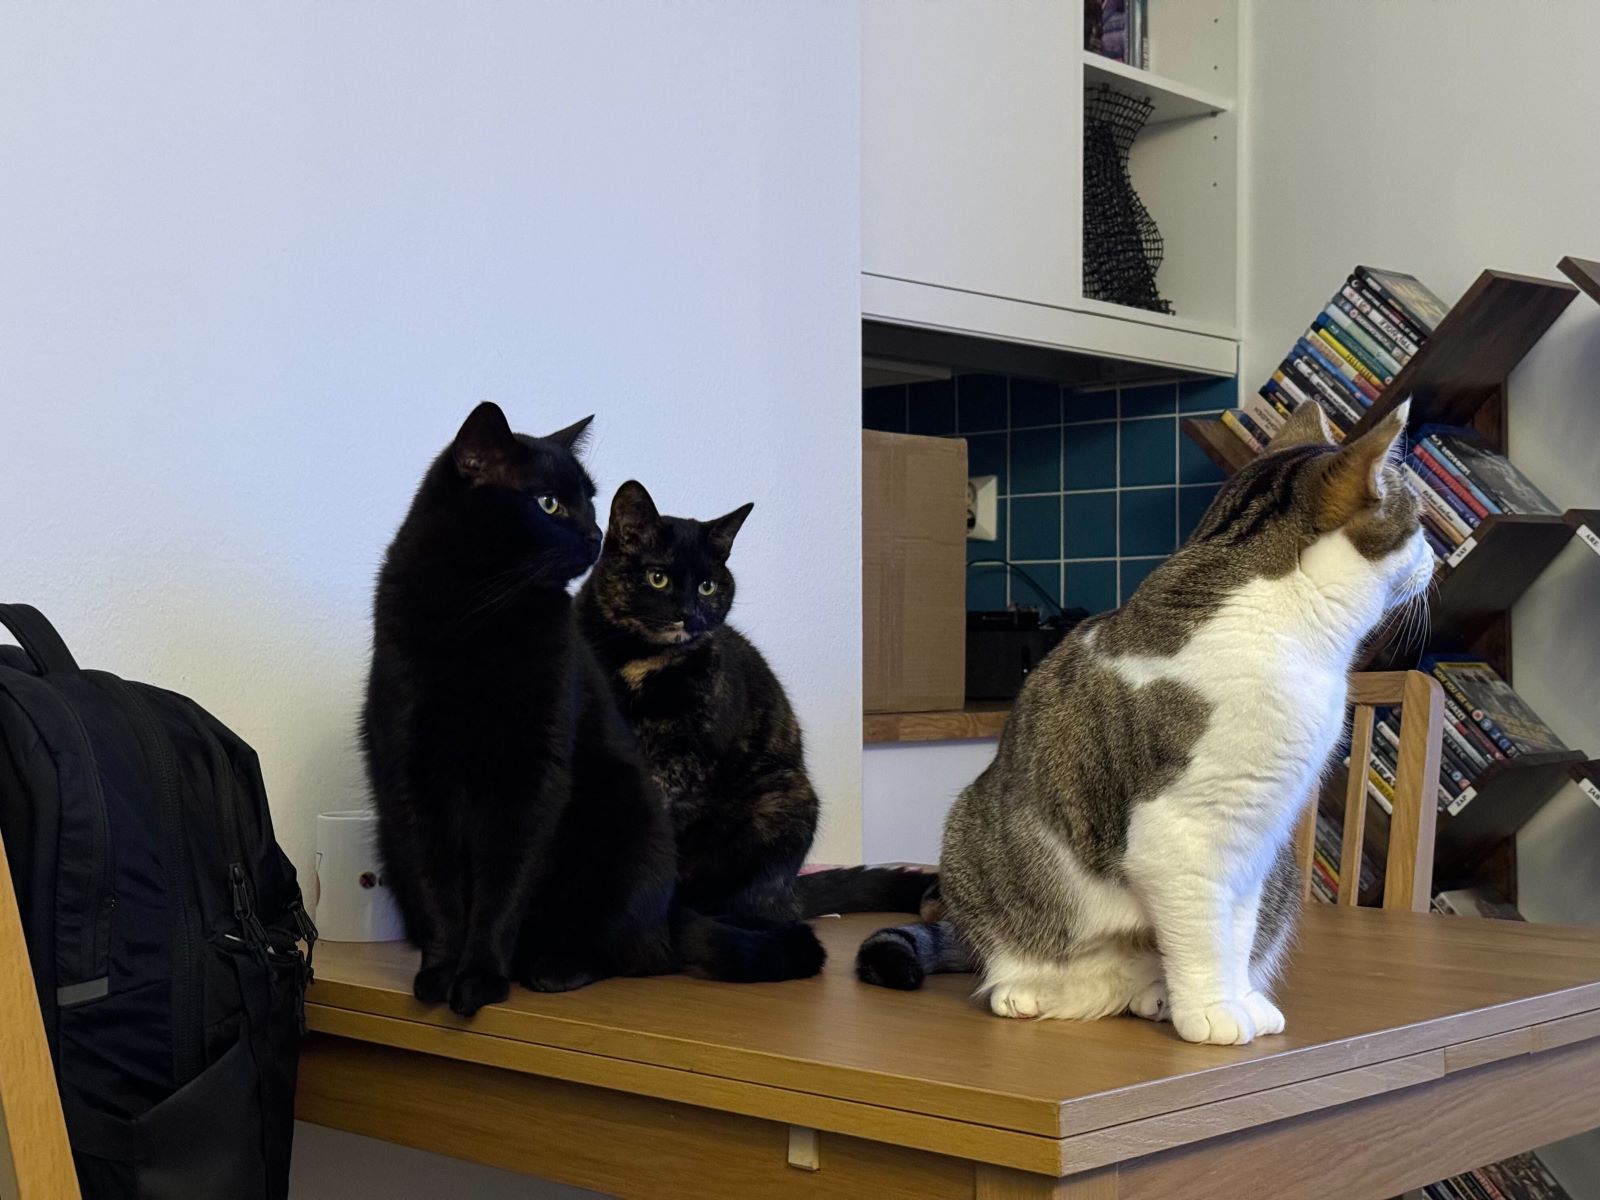 My cats: Heimdall (the void), Eir (the tortie) and Idun (the fool) sitting on the table